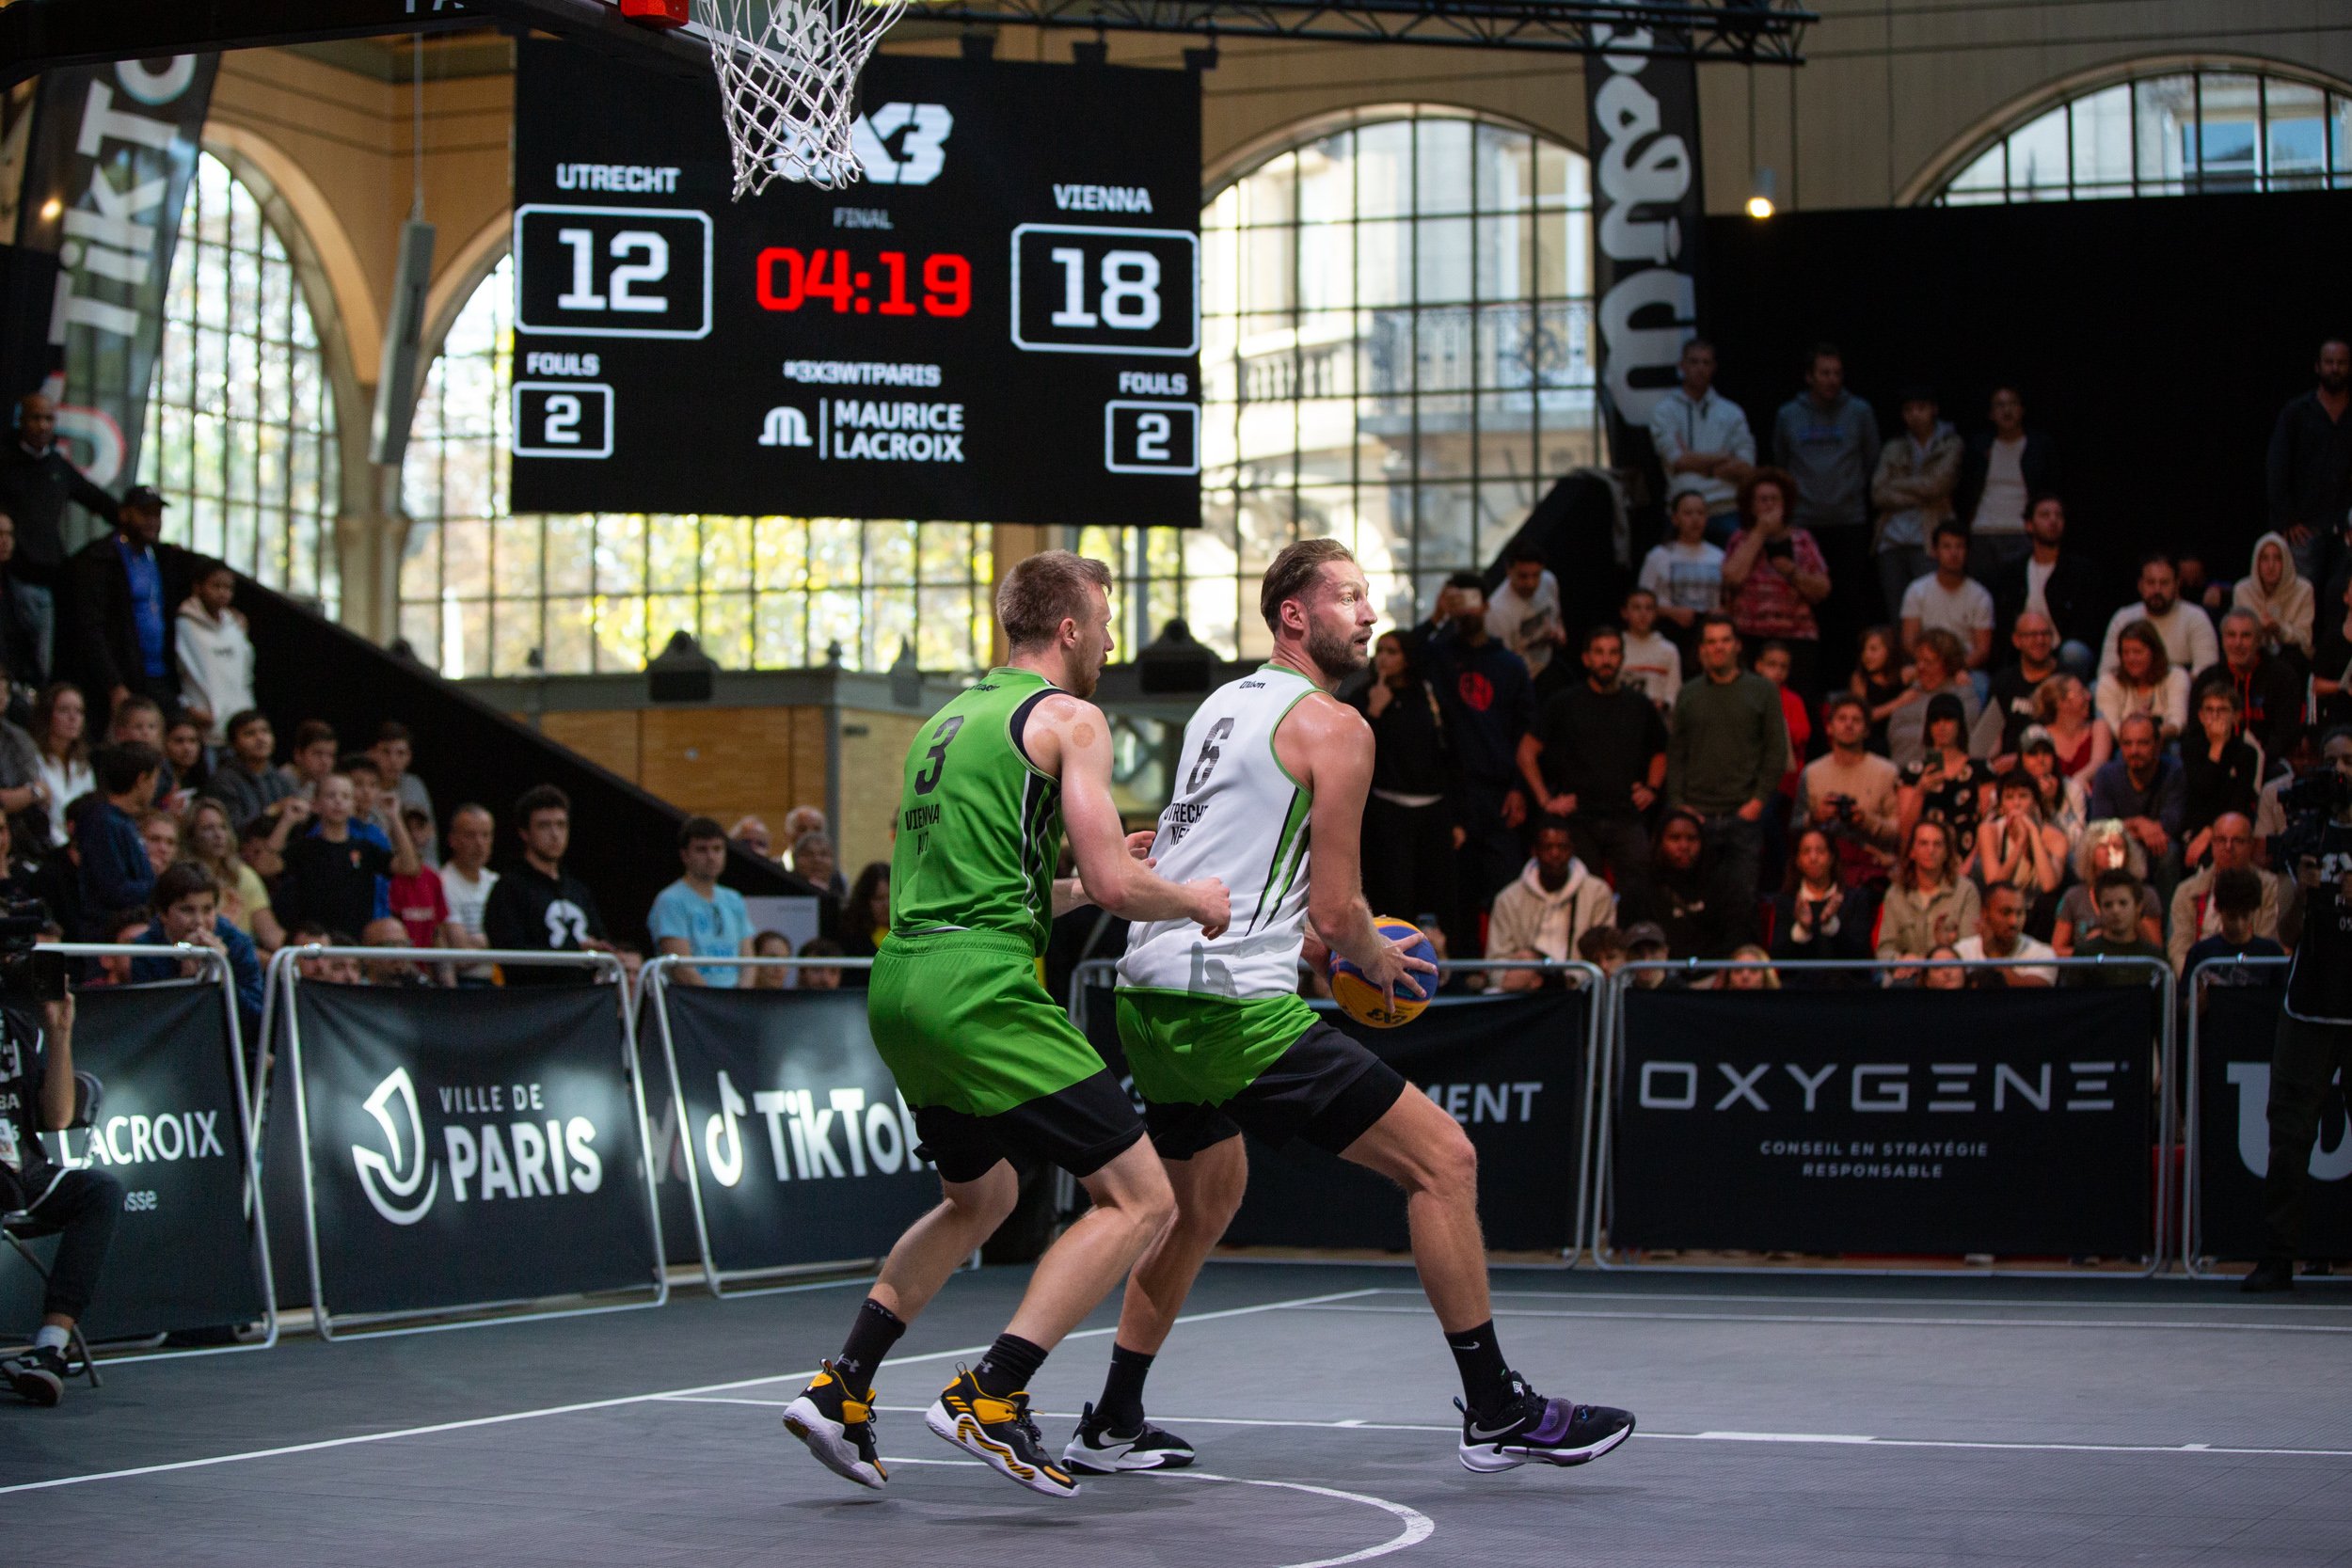  freeze-frame-action-shot-at-professional-basketball-event 